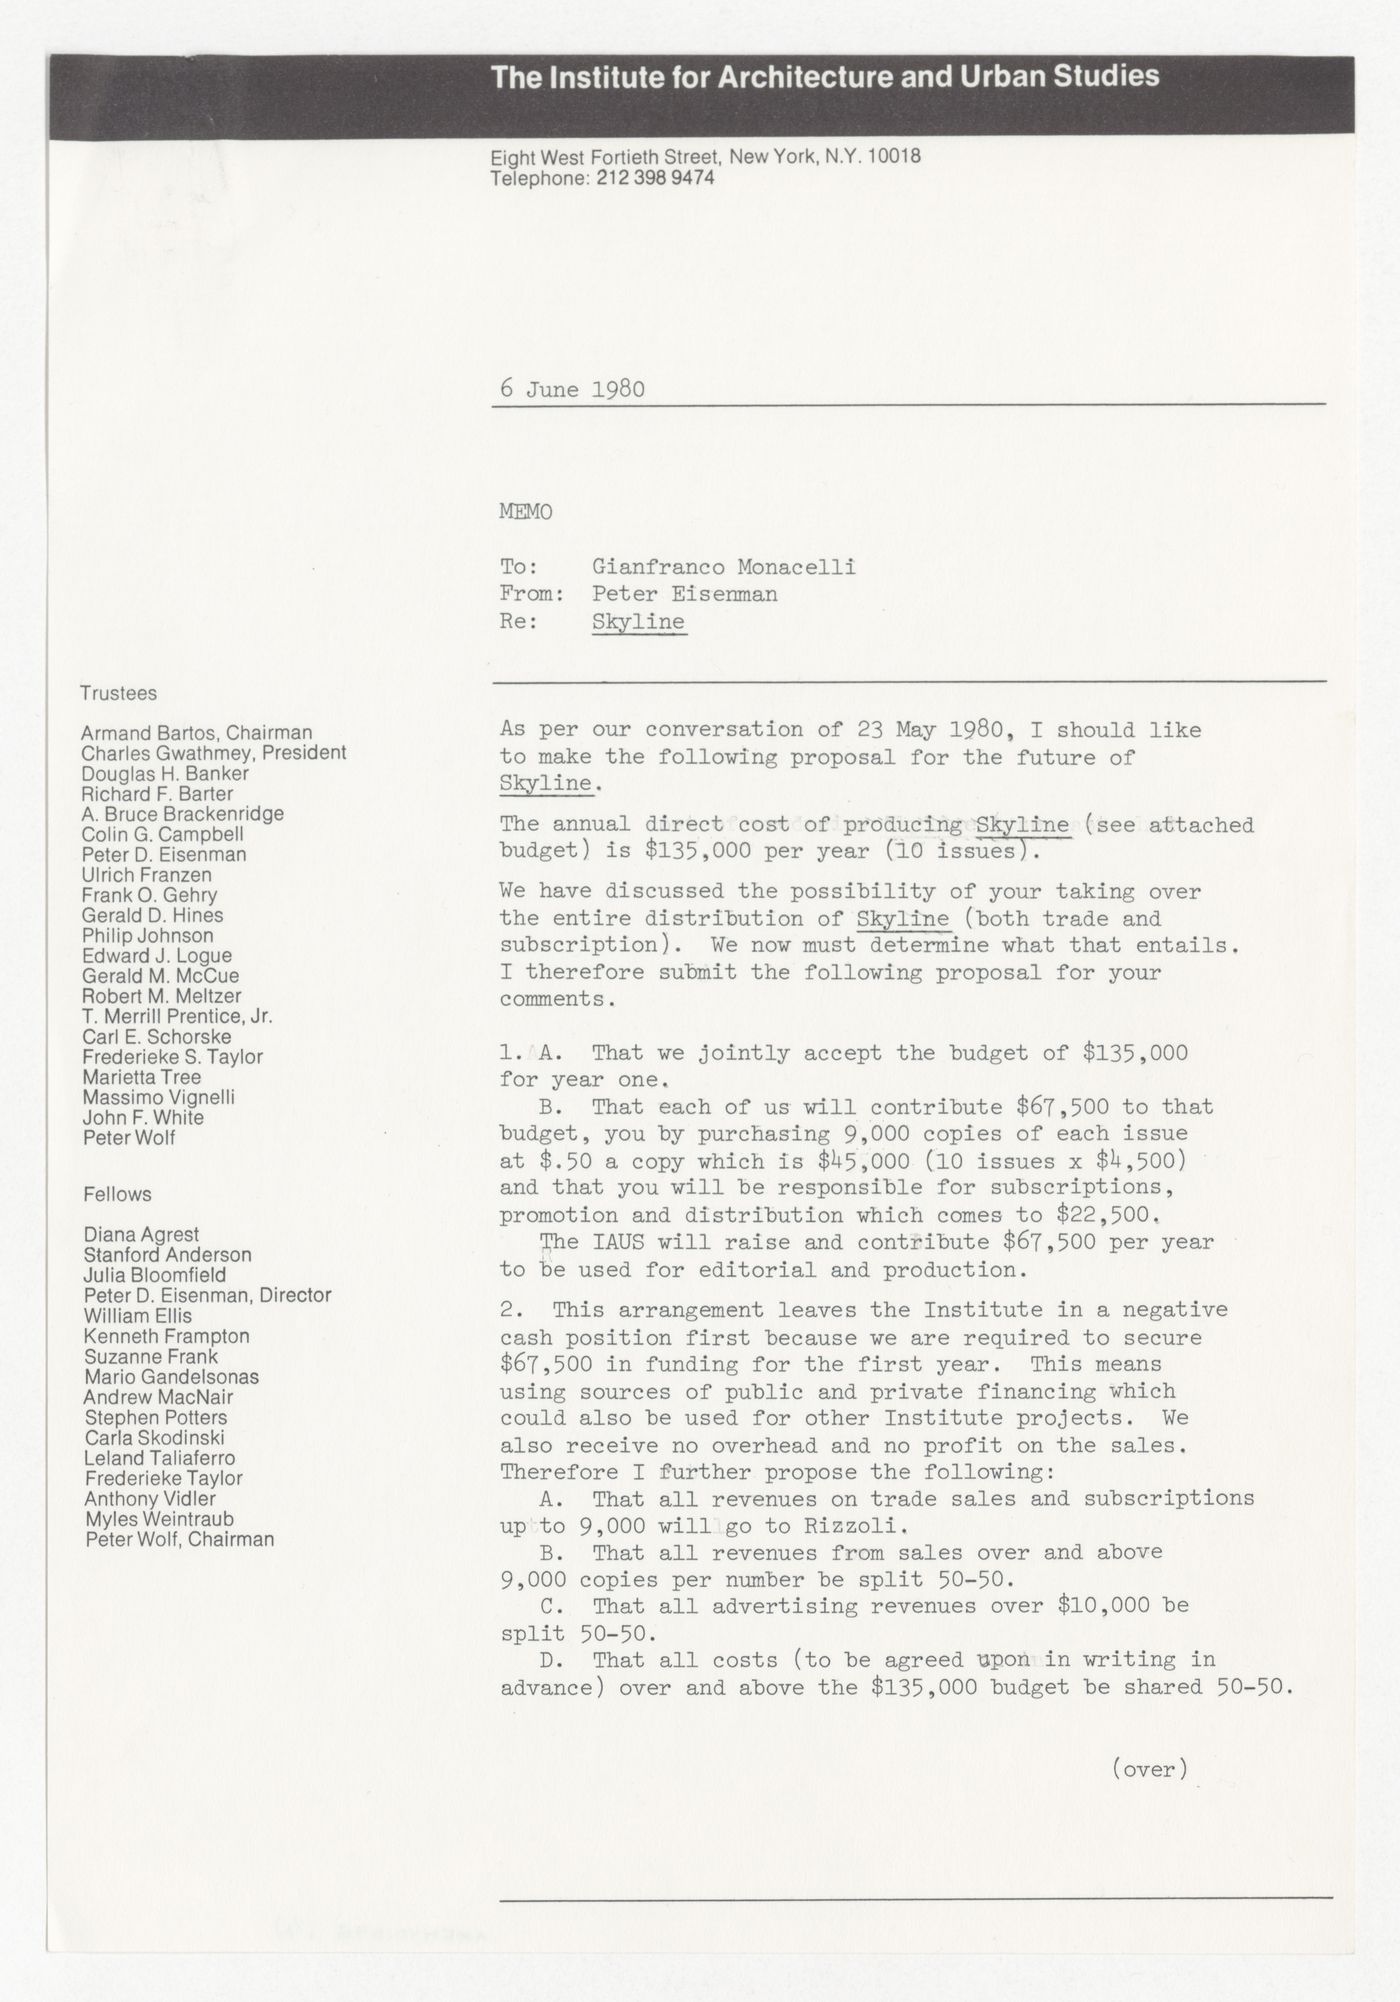 Memorandum from Peter D. Eisenman to Gianfranco Monacelli about a proposal for the future of Skyline